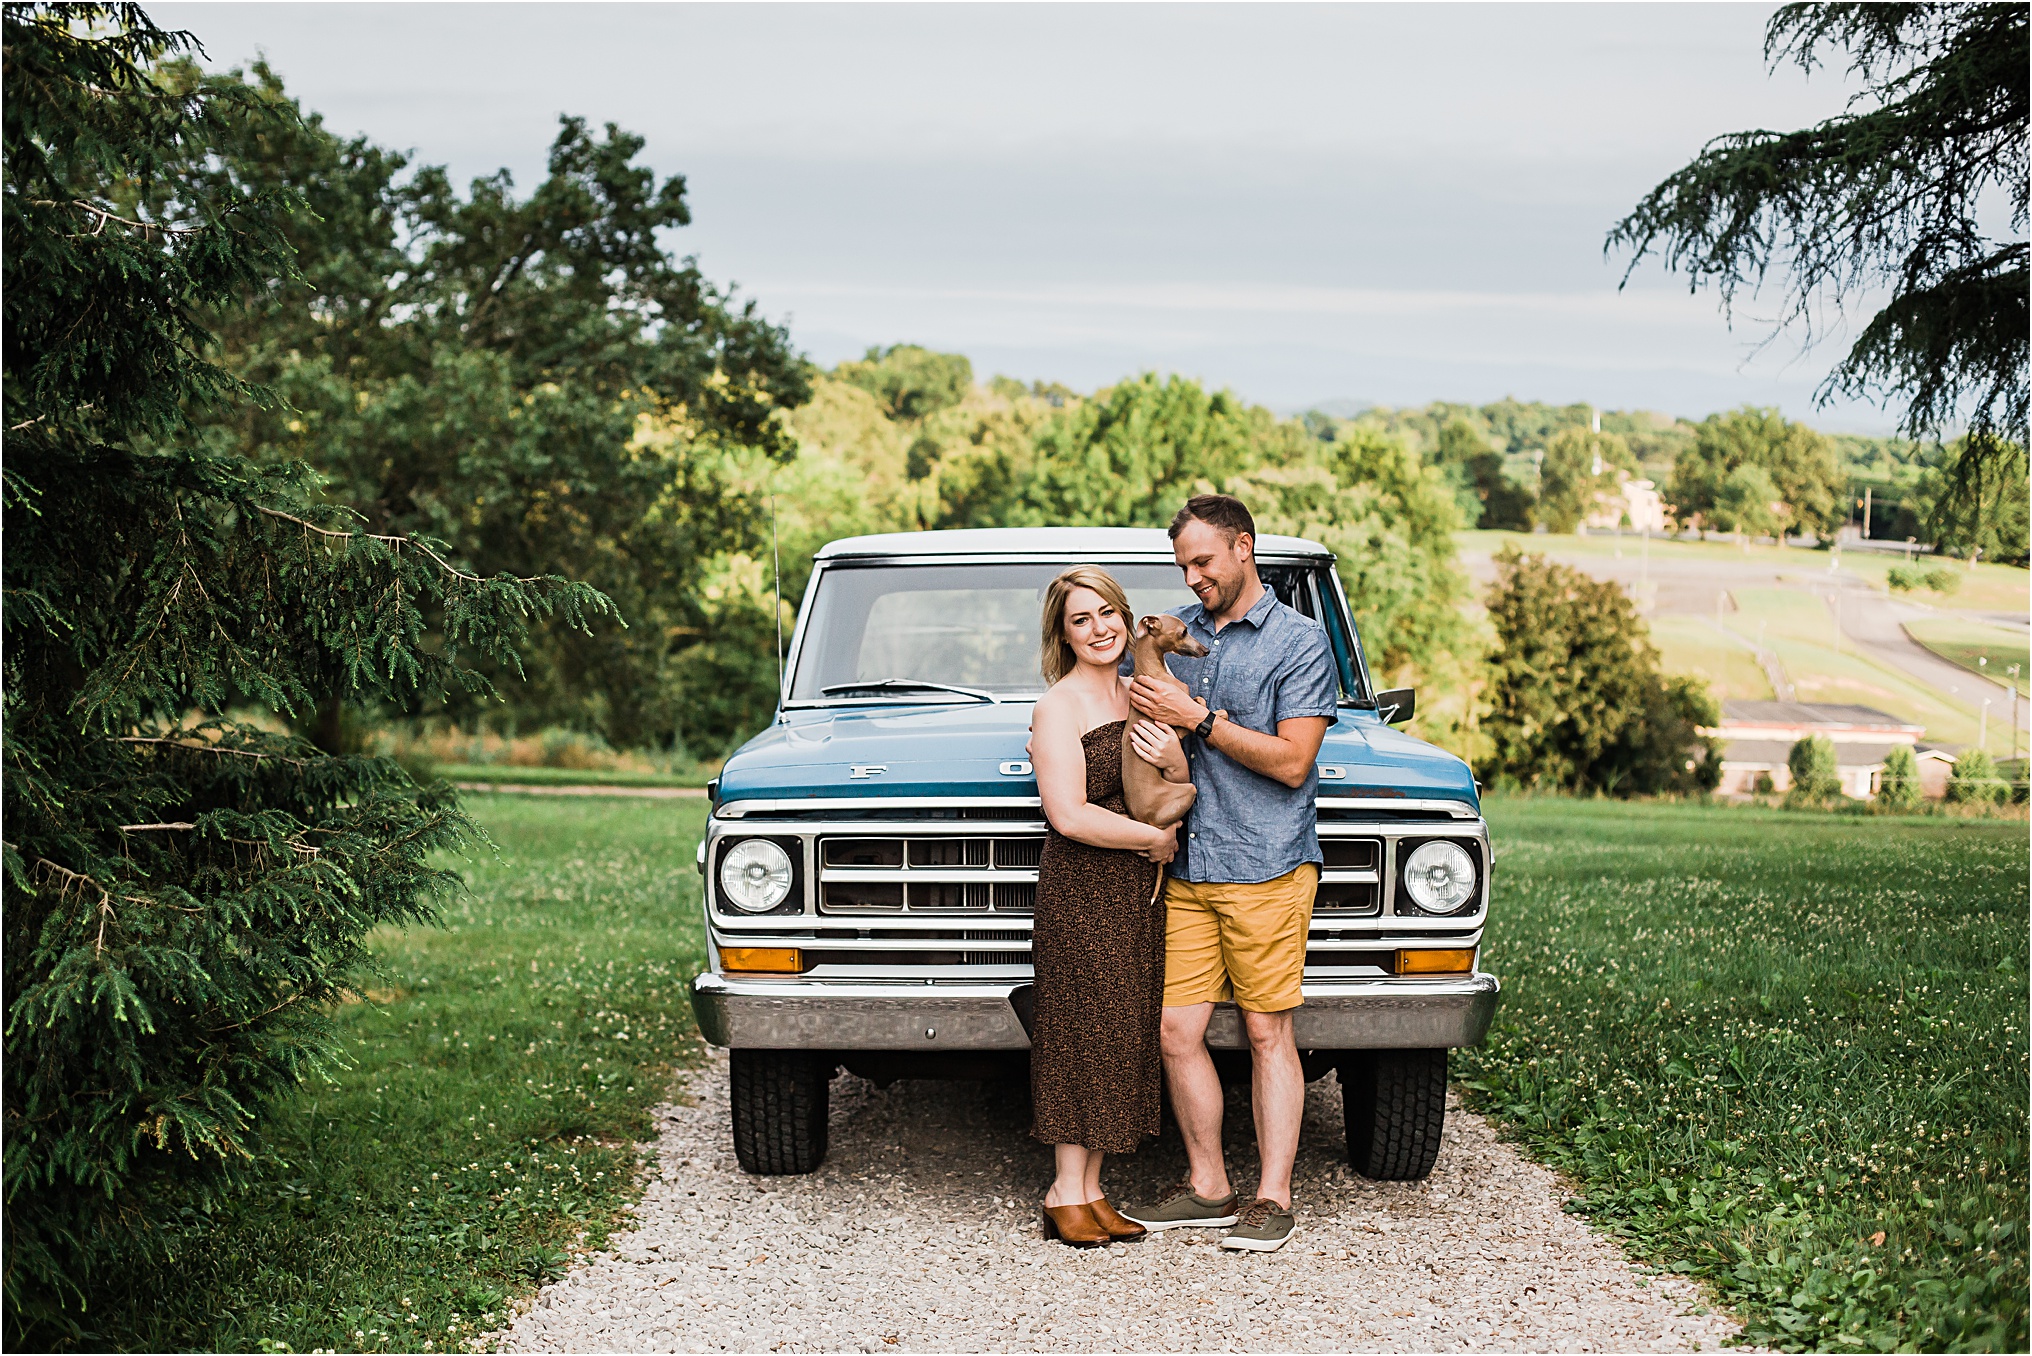 Airplane Engagement,Airport Engagement,Amber Lowe Photo,Americana,Antiques,Engagement Photo Ideas,Ford 100,Island Home Airport,Knoxville Wedding Photographer,Summer Engagement Photos,Summertime Engagement,